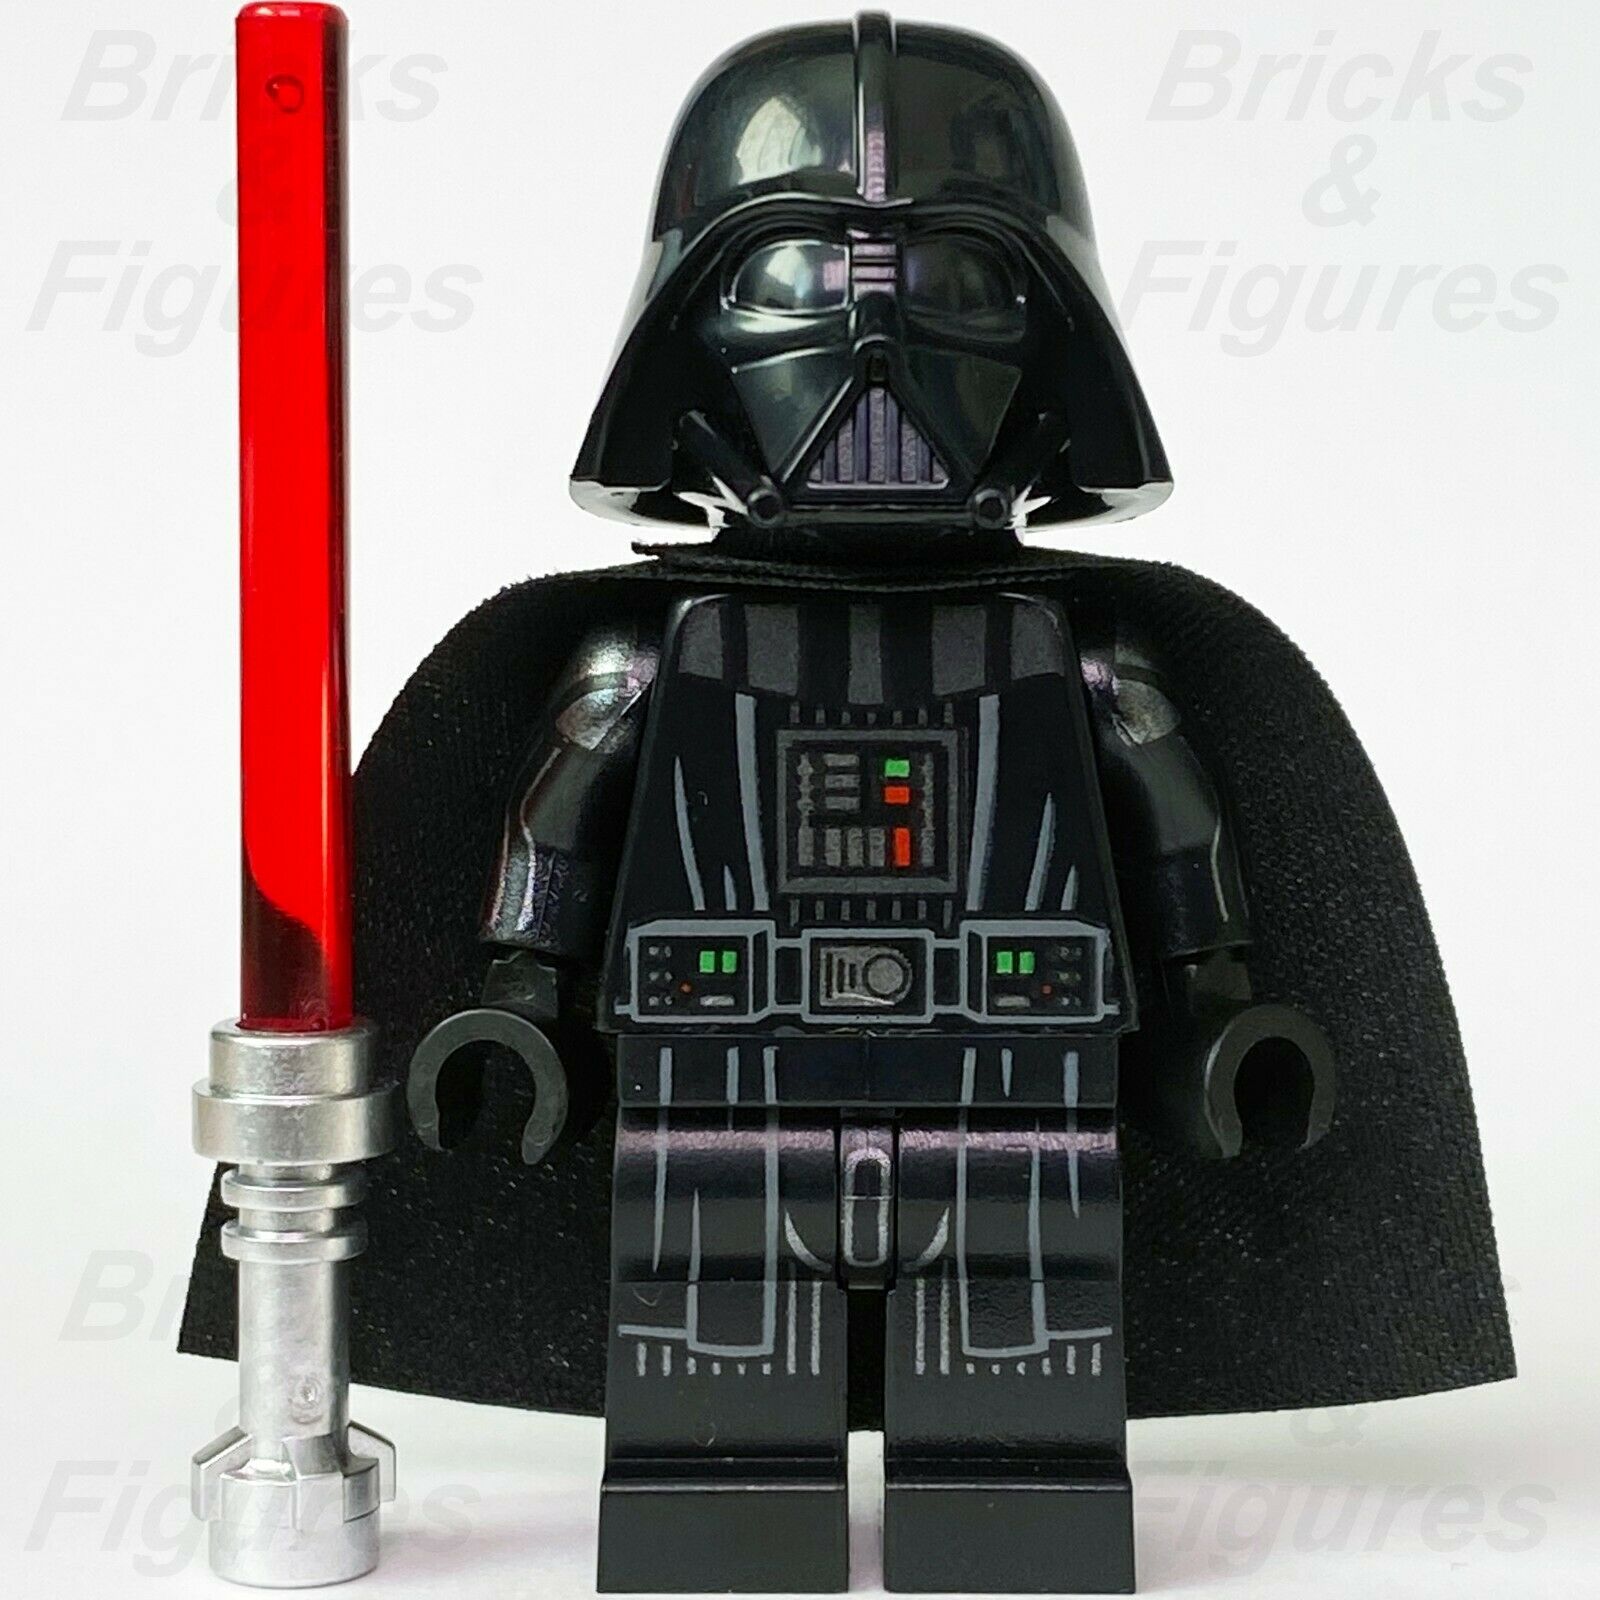 Star Wars LEGO Darth Vader Sith Lord with Printed Arms Minifigure 75294 - Bricks & Figures